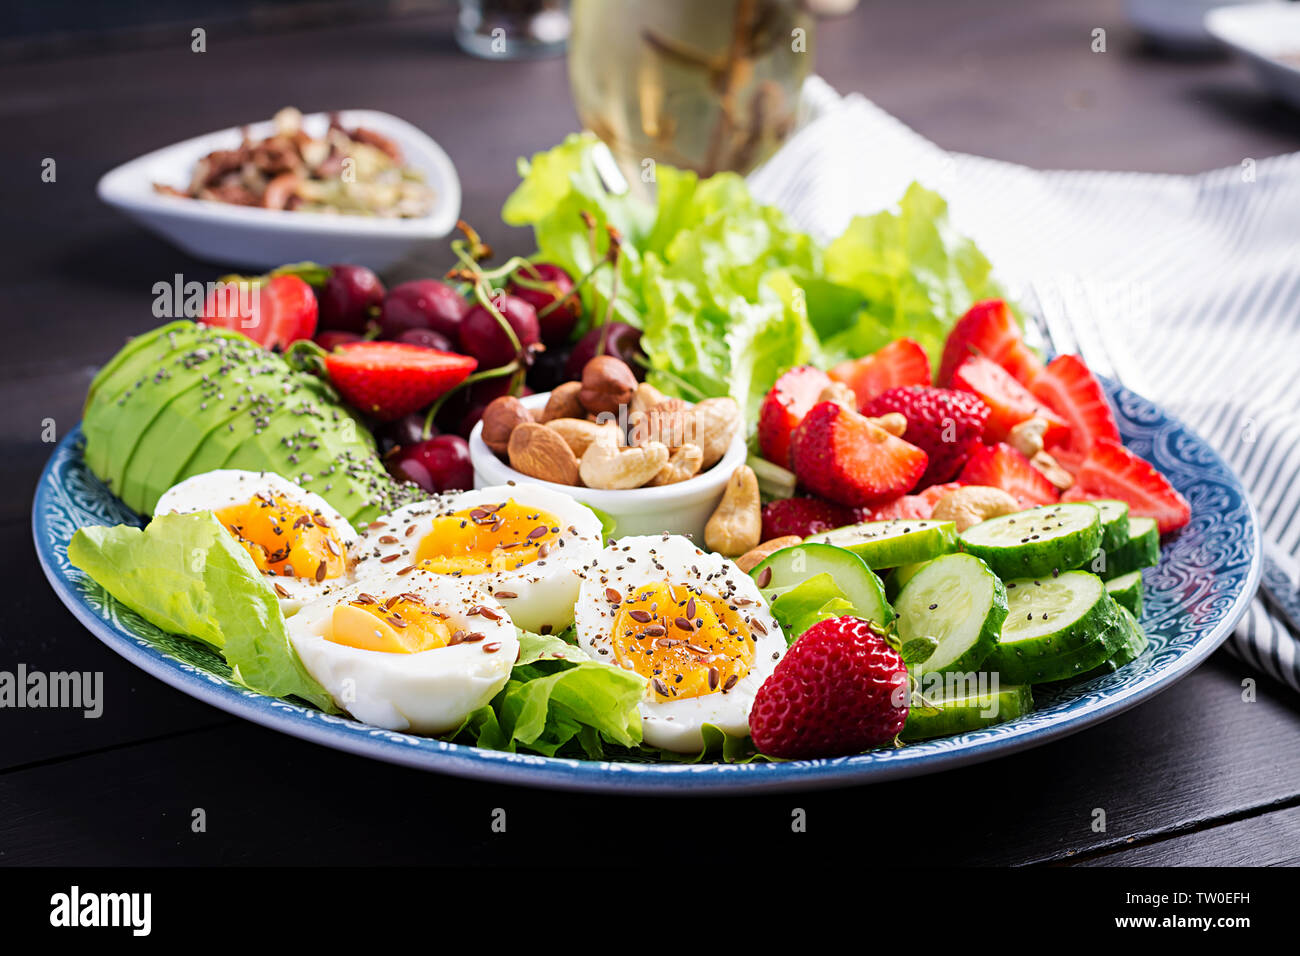 Plate with a paleo diet food. Boiled eggs, avocado, cucumber, nuts, cherry and strawberries. Paleo breakfast. Stock Photo